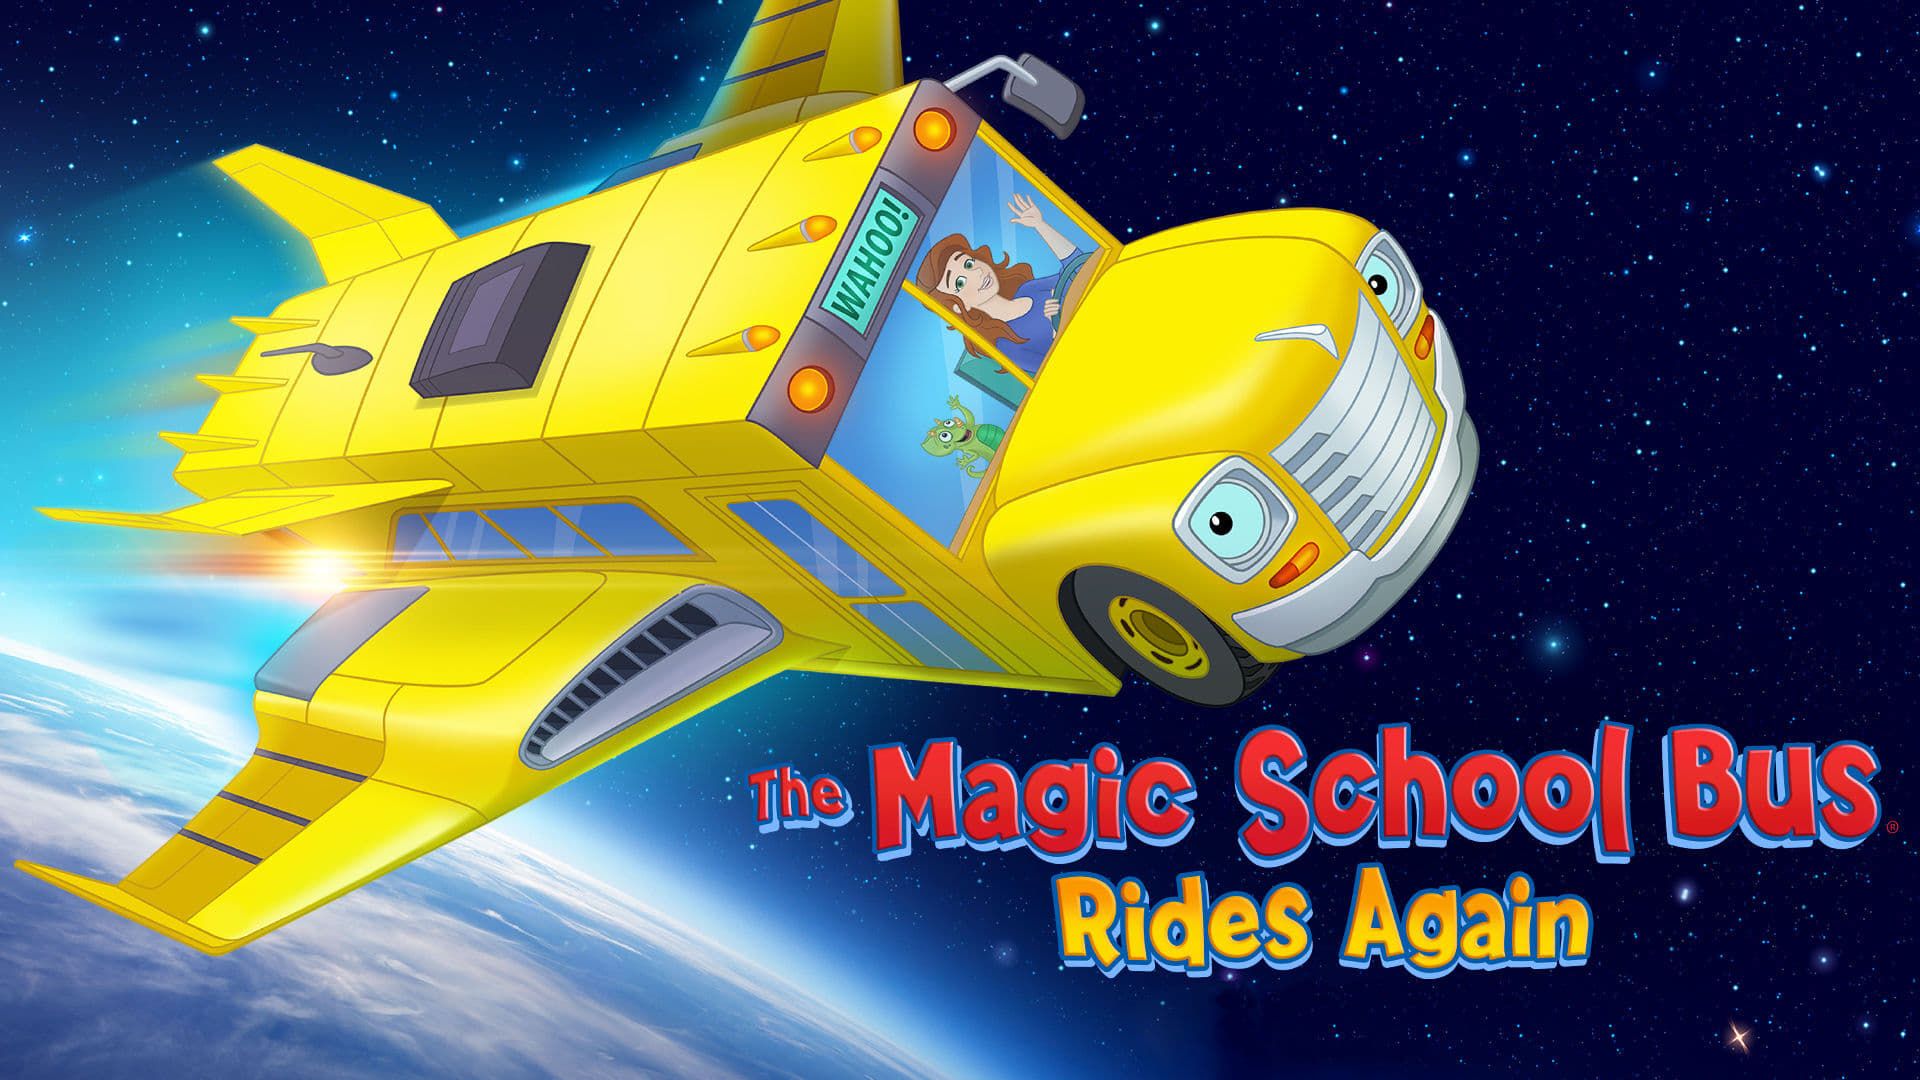 The Magic School Bus Rides Again: Kids in Space background